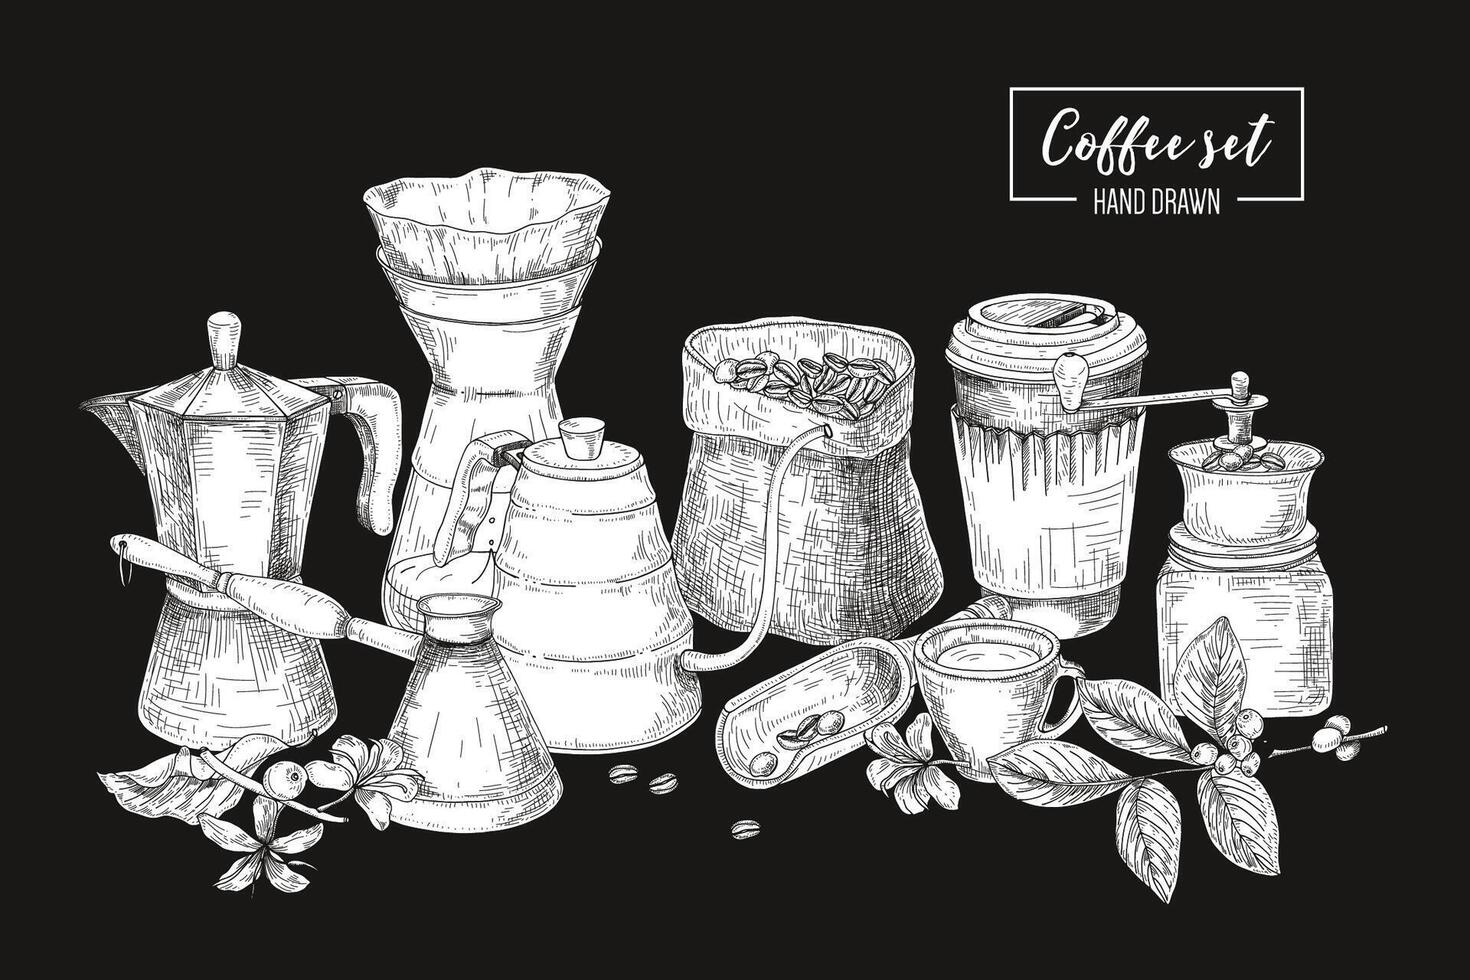 Collection of tools for coffee brewing in black and white colors - moka pot, turkish cezve, kettle with long spout, glass dripper, grinder. Monochrome illustration in vintage engraving style. vector